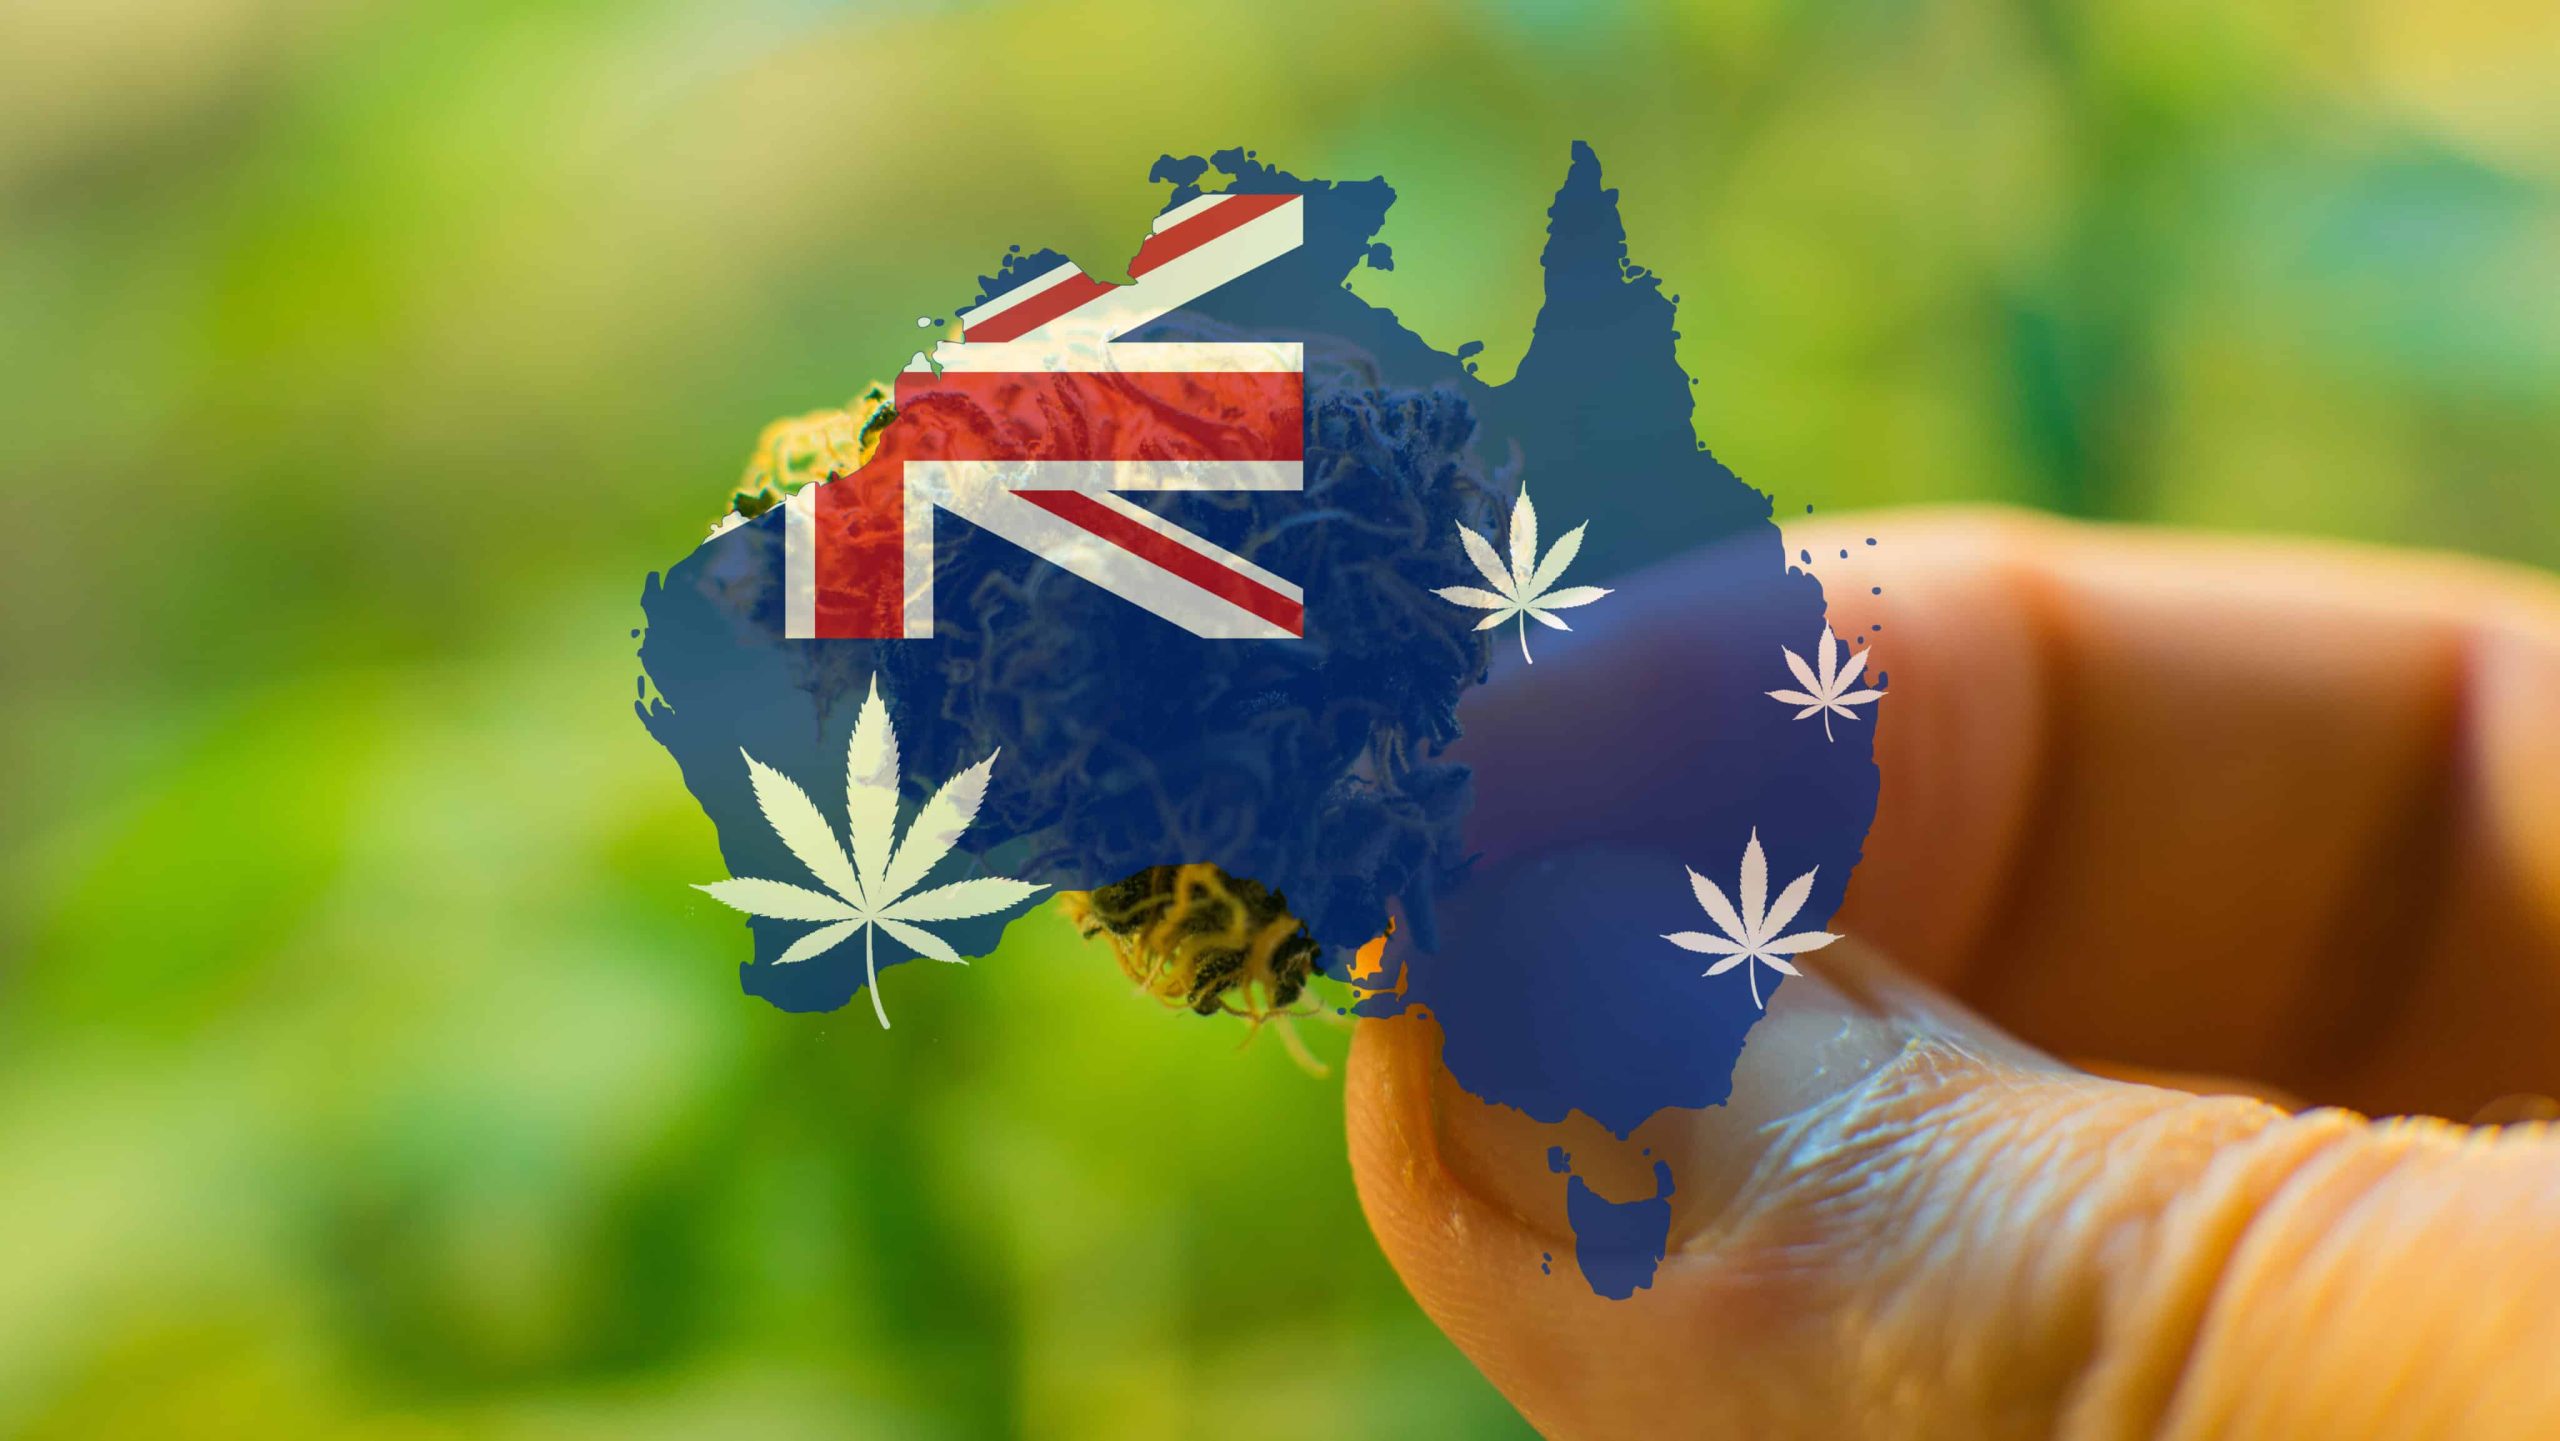 Australian Residents Could Save $850 Million Annually if Cannabis is Decriminalized